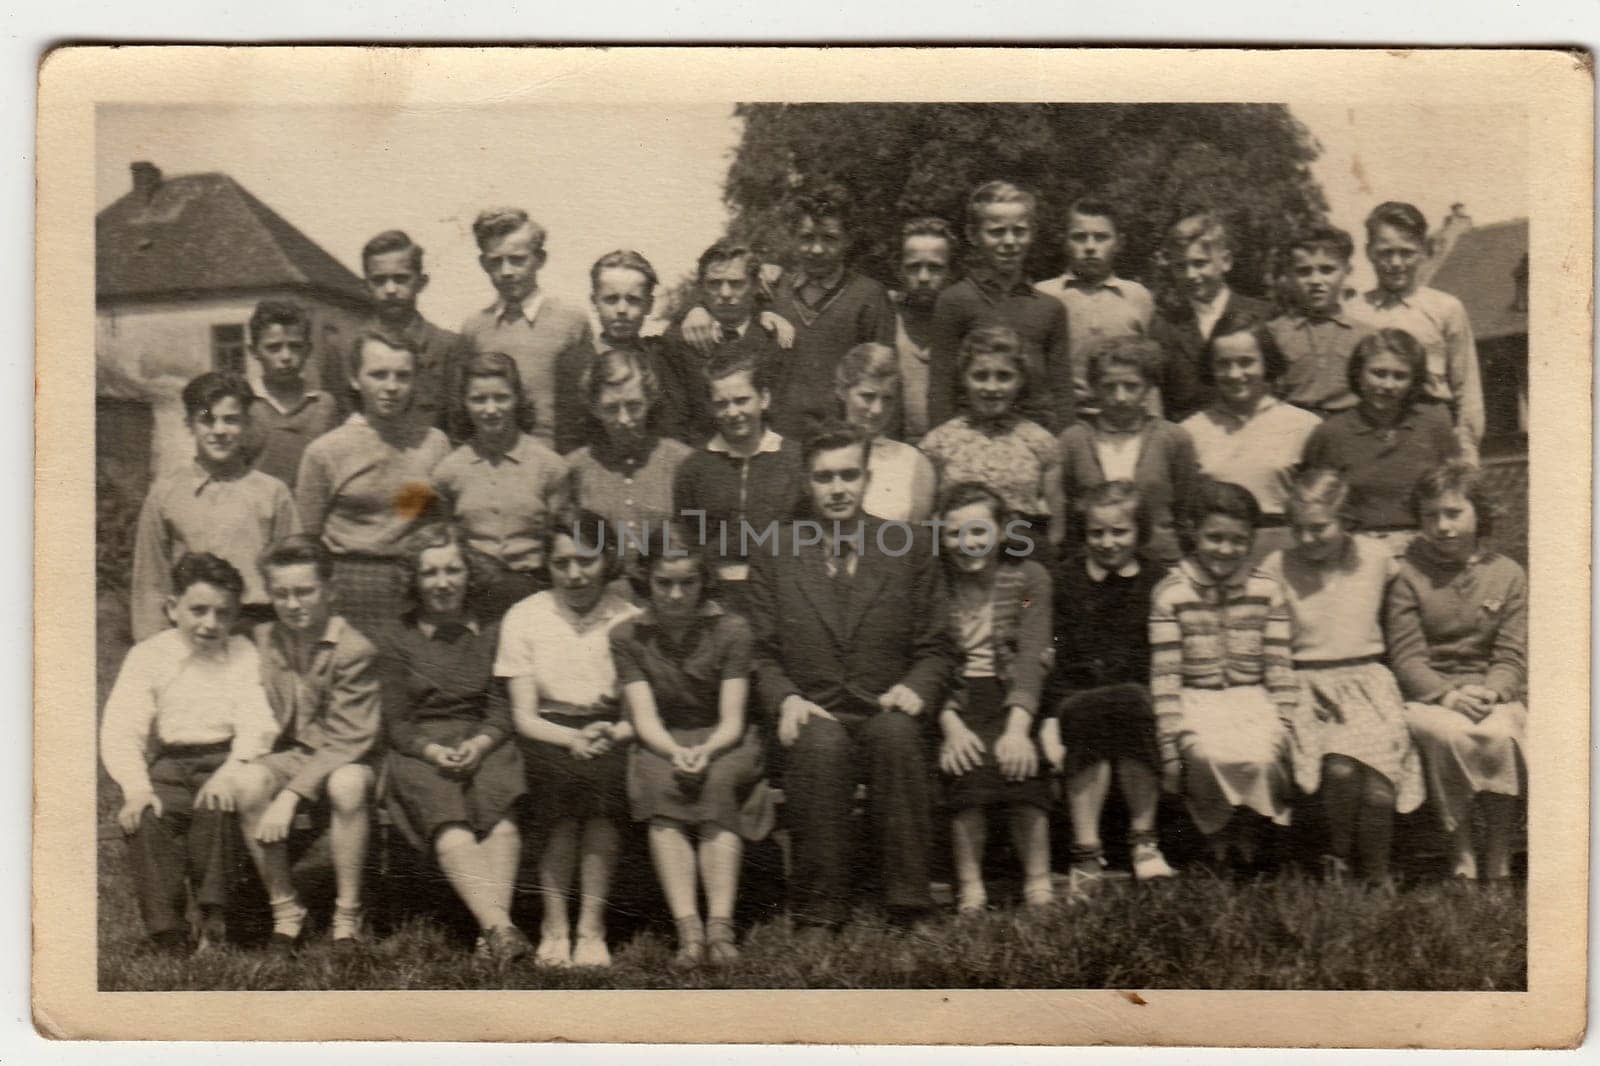 A vintage photo shows schoolmates with male teacher. by roman_nerud